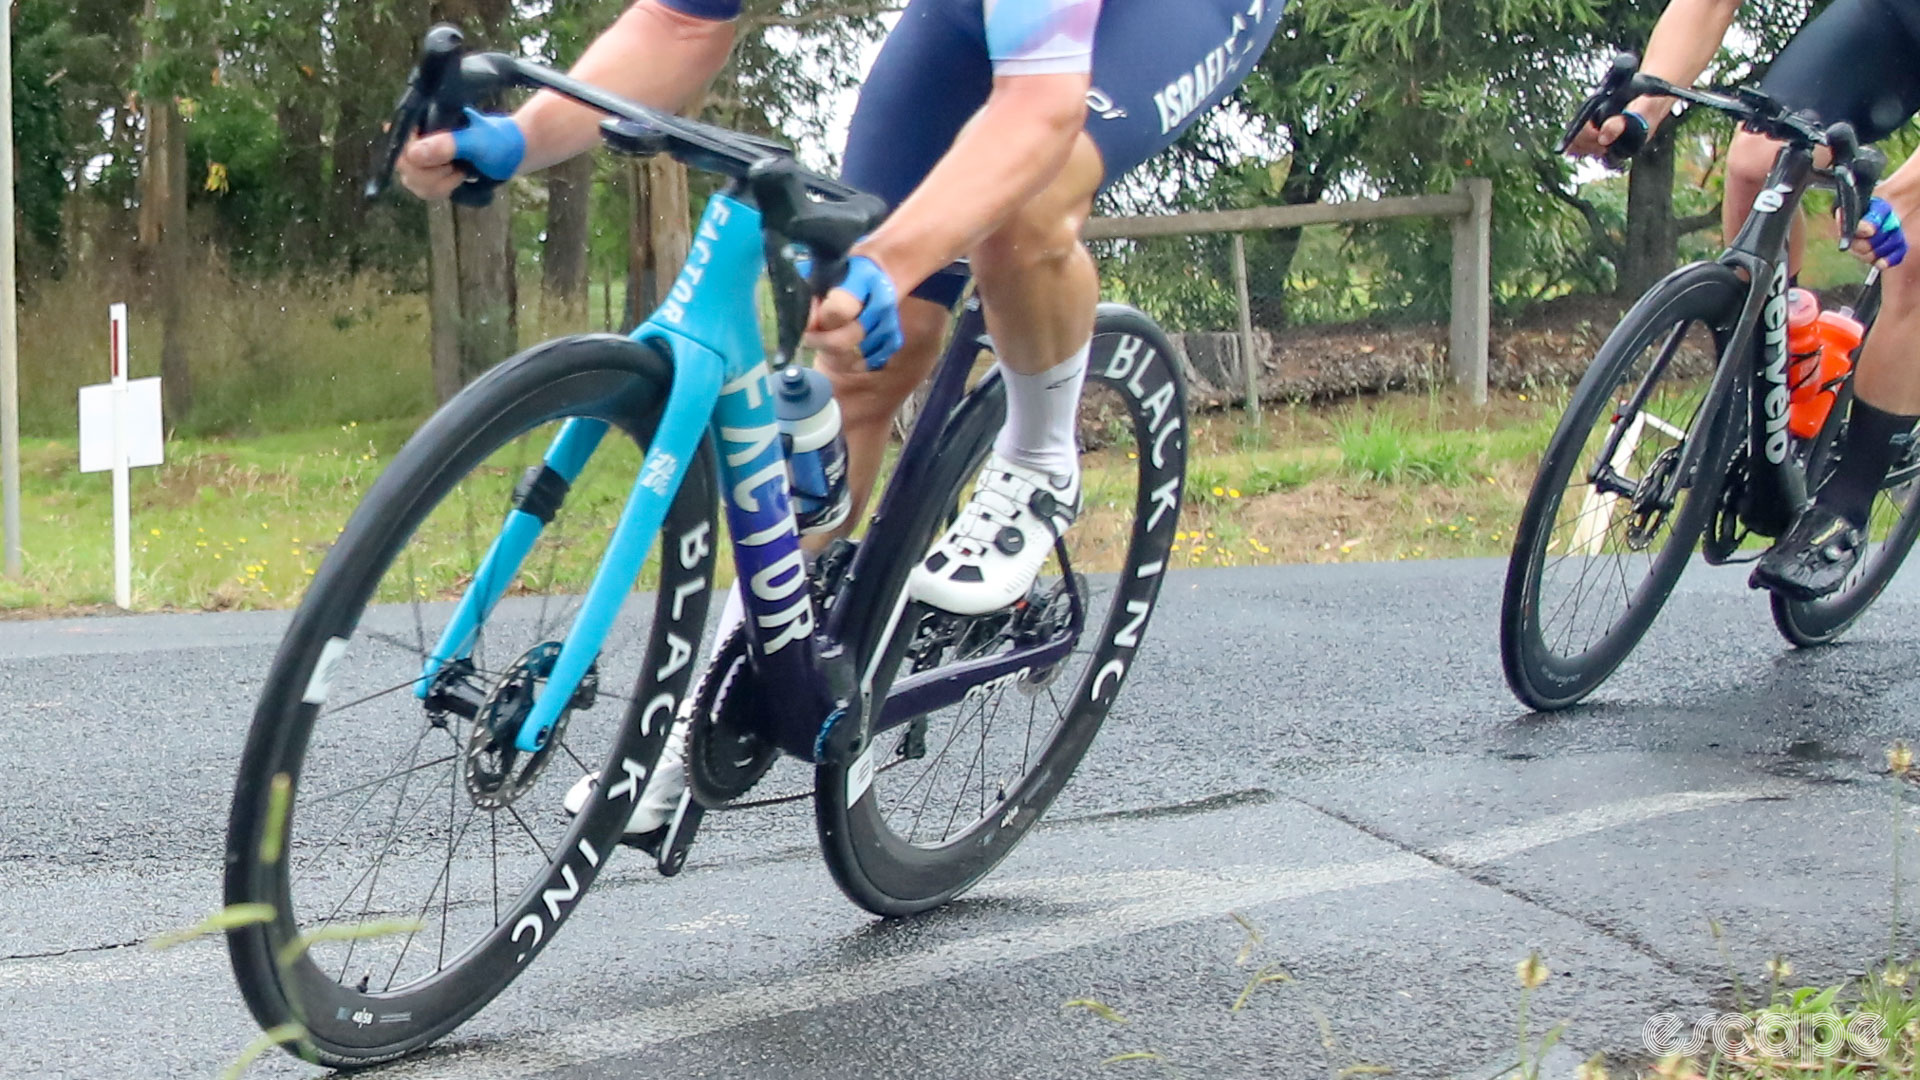 The photo shows Simon Clarke cornering on the new Factor Ostro at the Australian road race national championships.